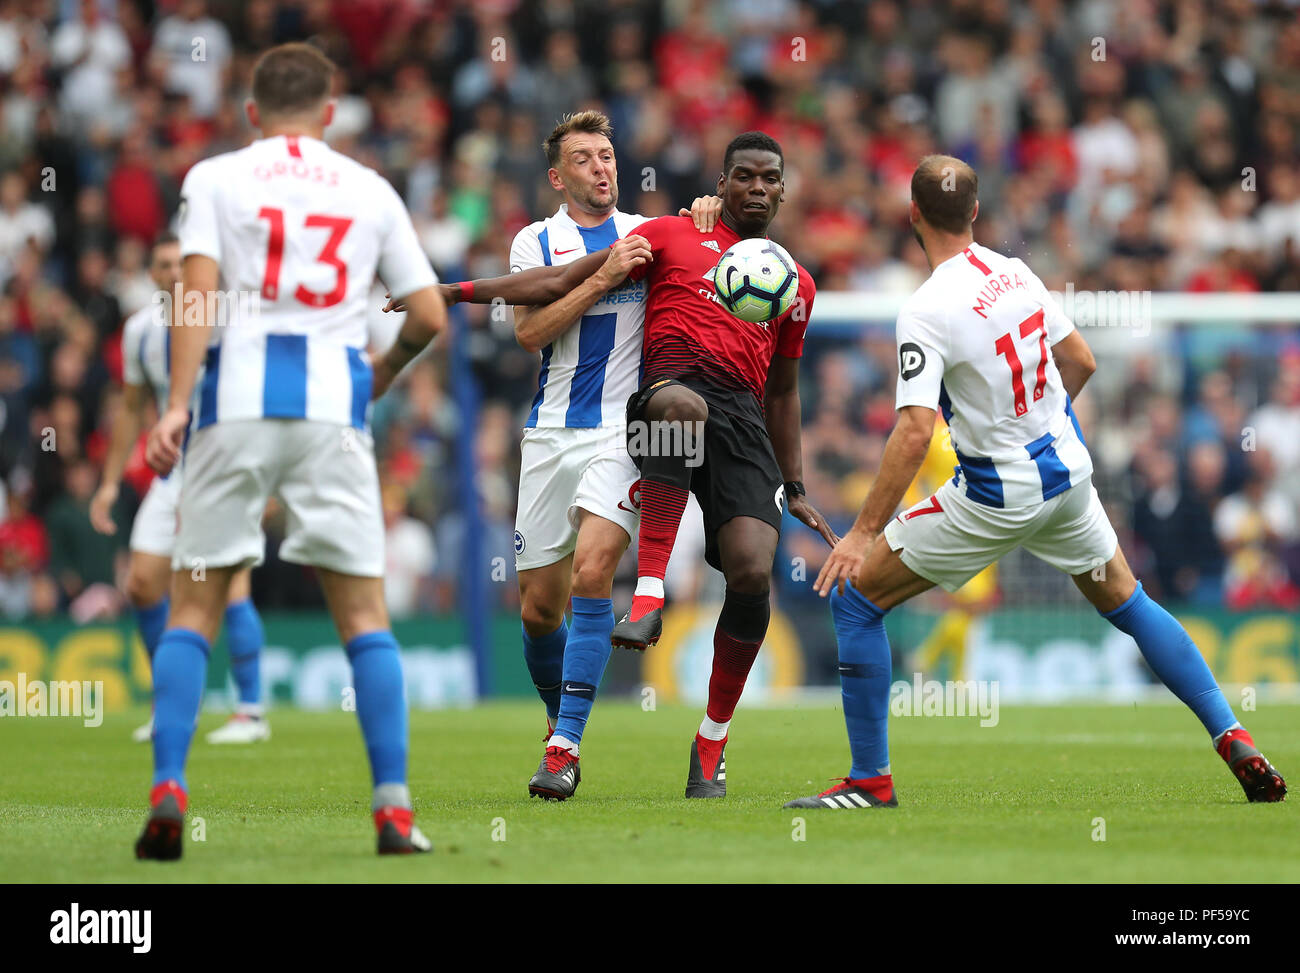 Manchester United's Paul Pogba (centre) battles for the ball with Brighton & Hove Albion's Dale Stephens (left) and Glenn Murray (right) during the Premier League match at the AMEX Stadium, Brighton. PRESS ASSOCIATION Photo. Picture date: Sunday August 19, 2018. See PA story SOCCER Brighton. Photo credit should read: Gareth Fuller/PA Wire. RESTRICTIONS: No use with unauthorised audio, video, data, fixture lists, club/league logos or 'live' services. Online in-match use limited to 120 images, no video emulation. No use in betting, games or single club/league/player publicatio Stock Photo